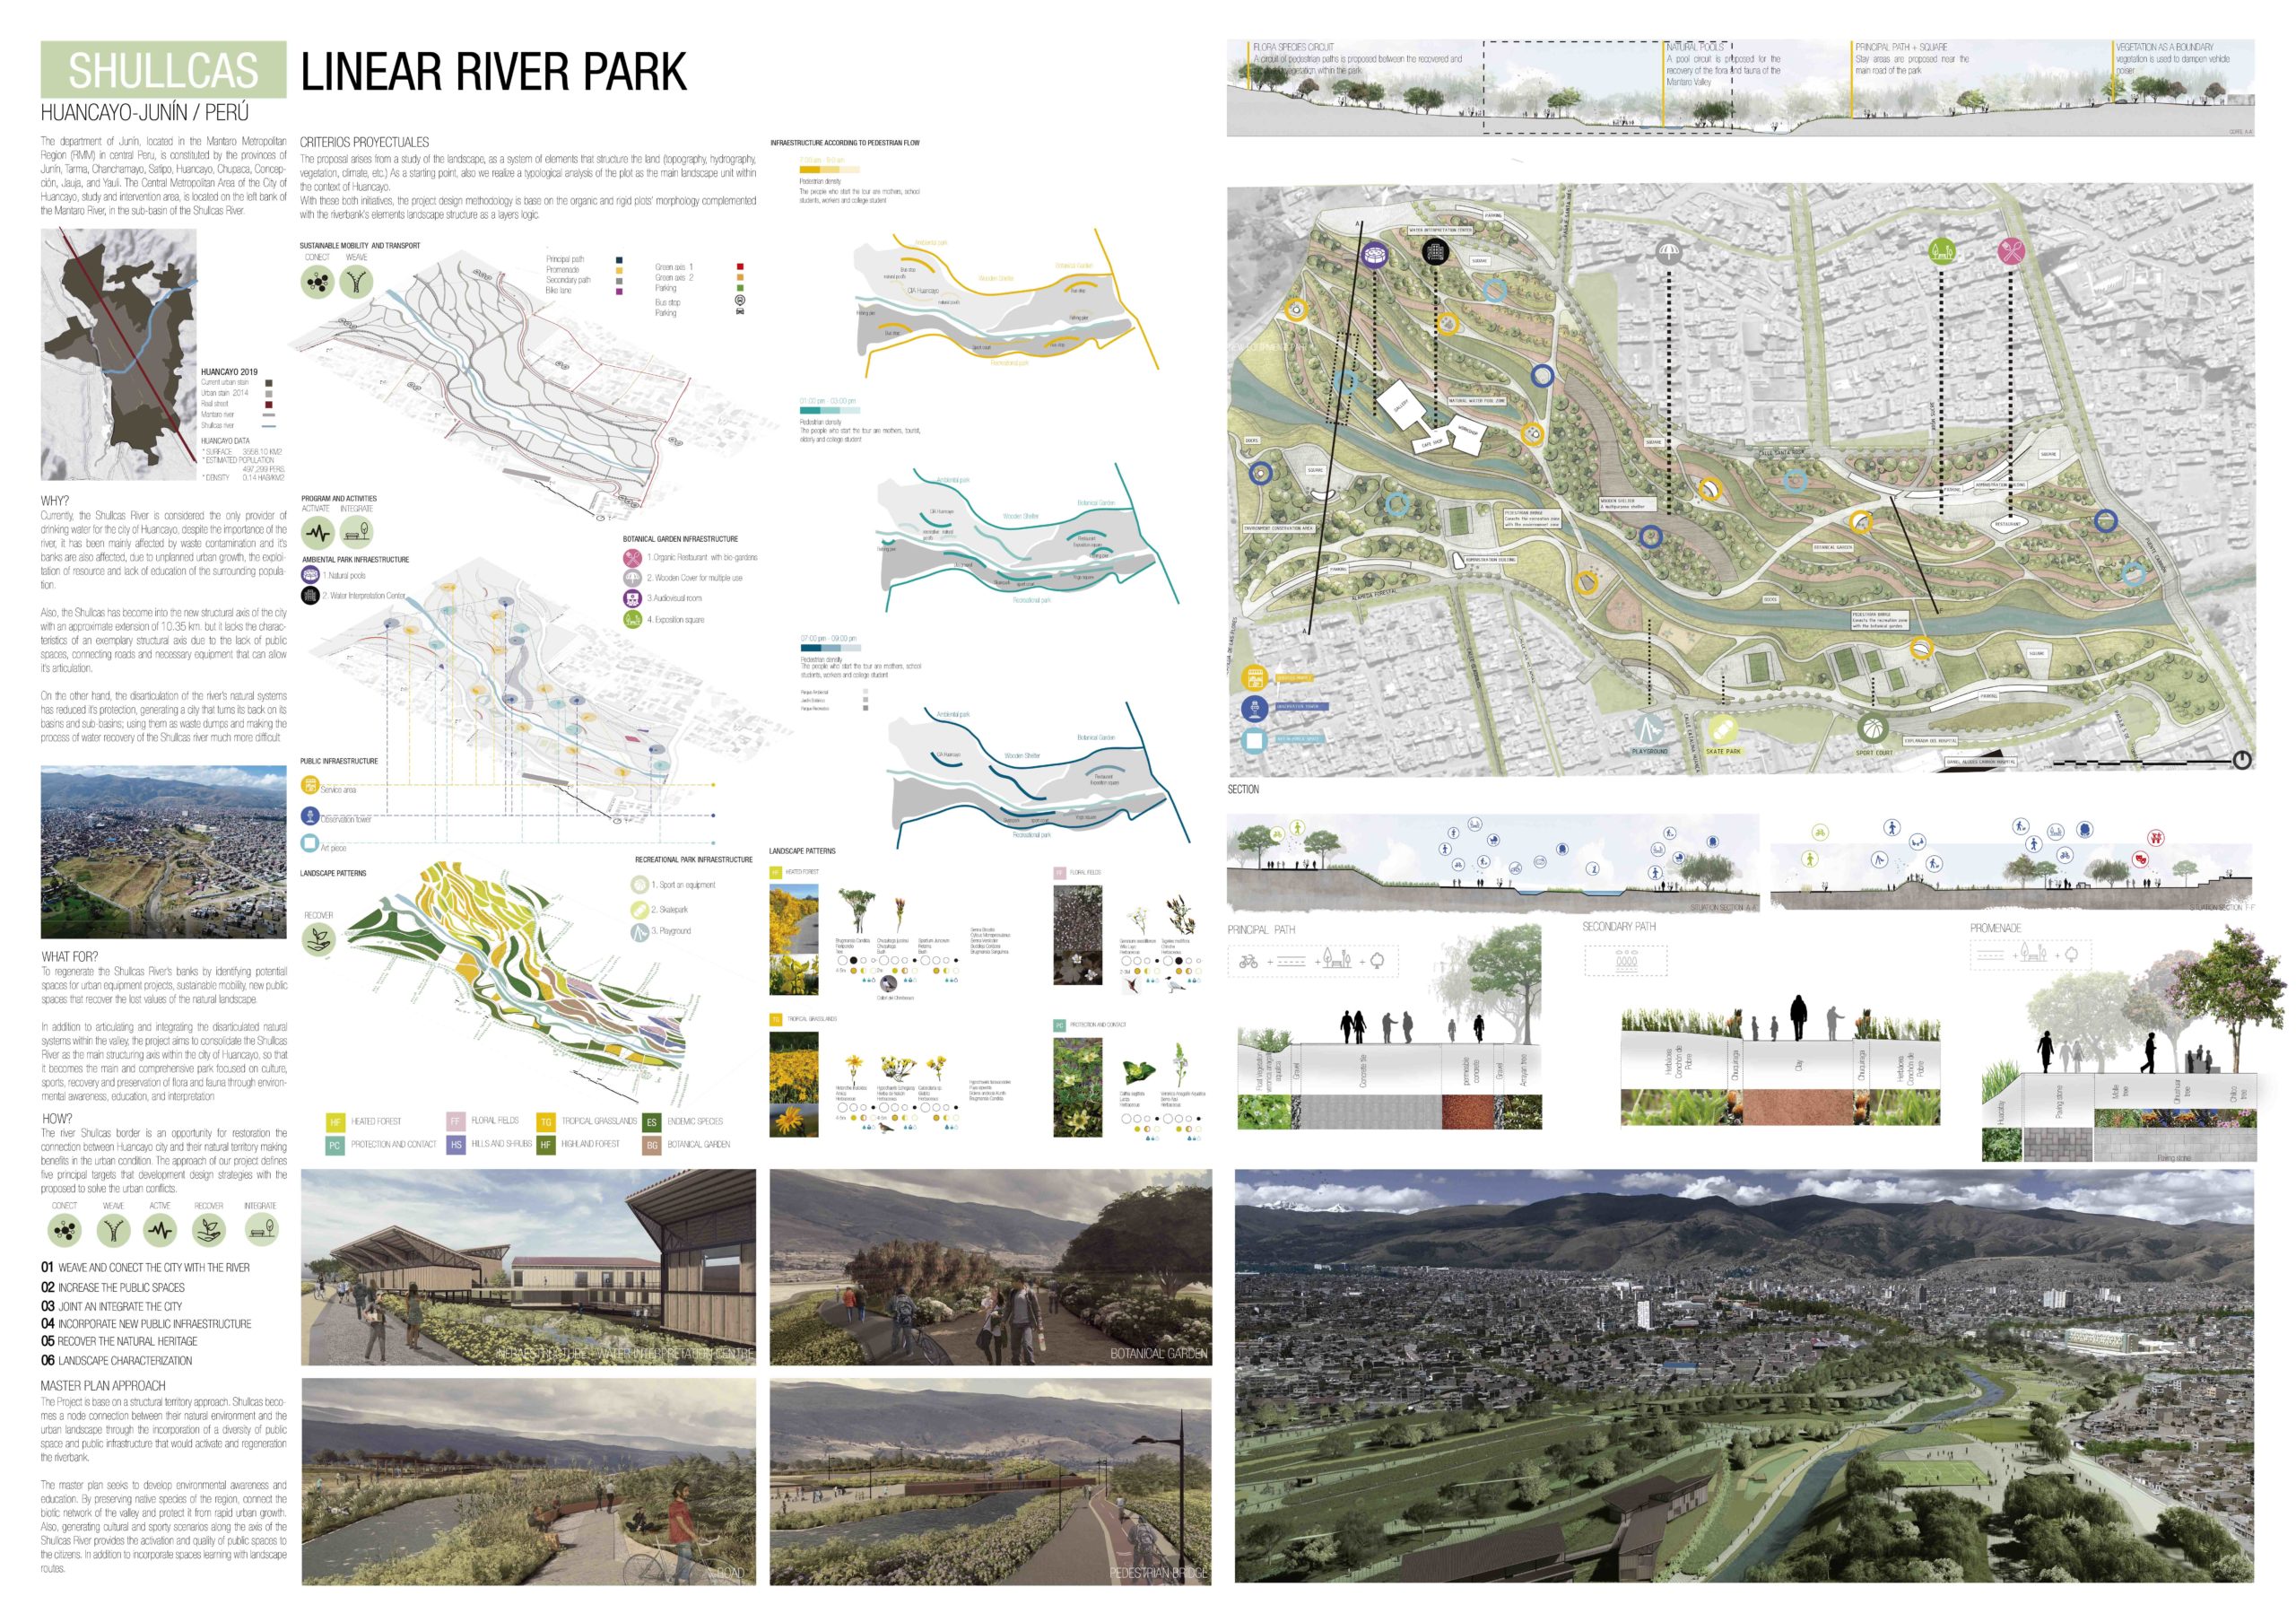 LINEAR PARK AND INTERPRETATION CENTER AS A PROJECT OF URBAN REGENERATION IN HUANCAYO CITY Board